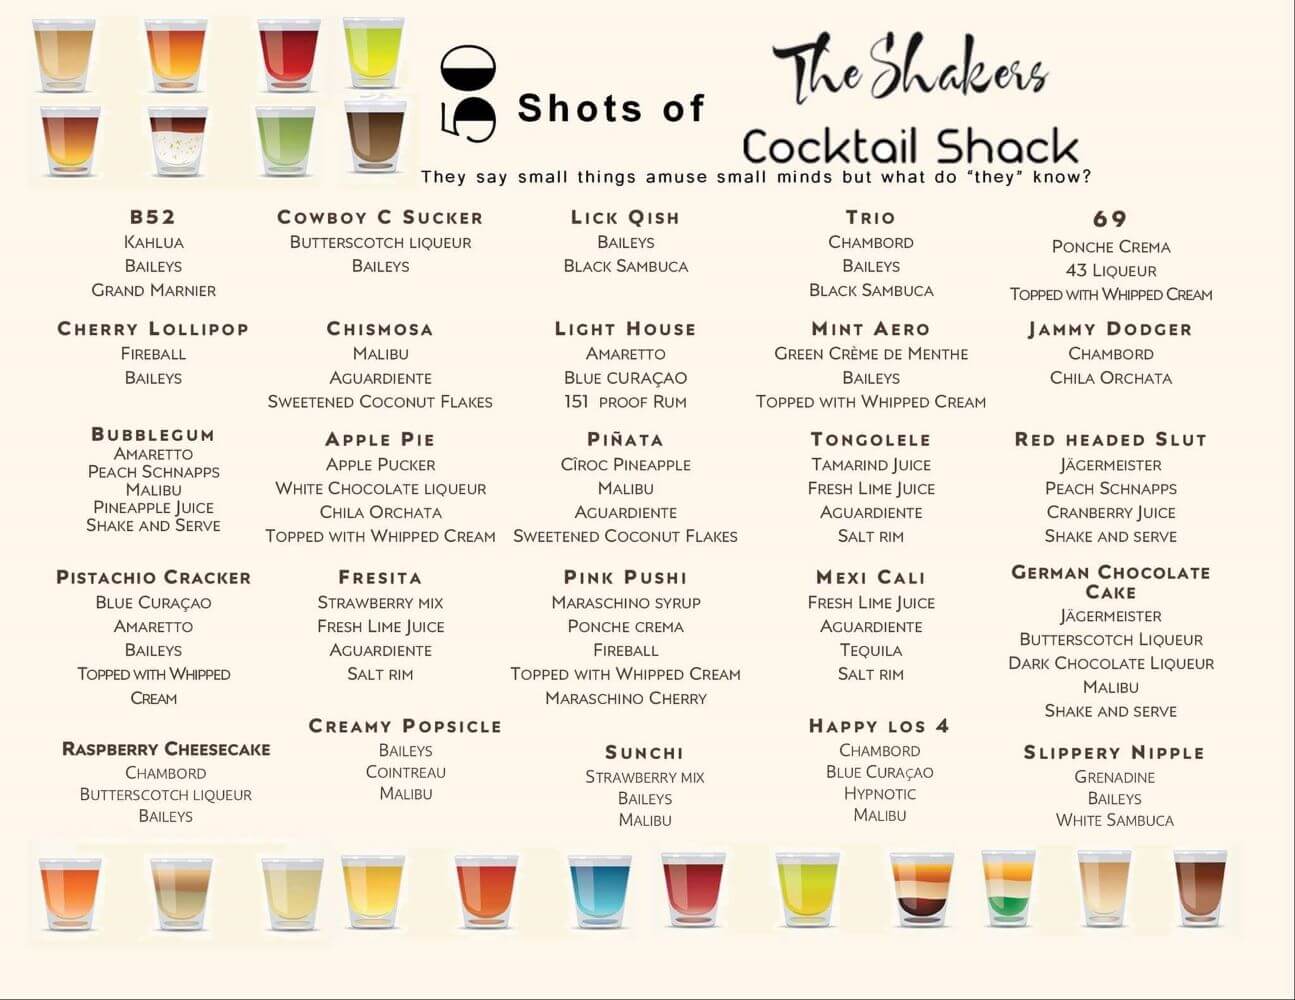 50 Shots of Cocktail Shack - USD 7.50